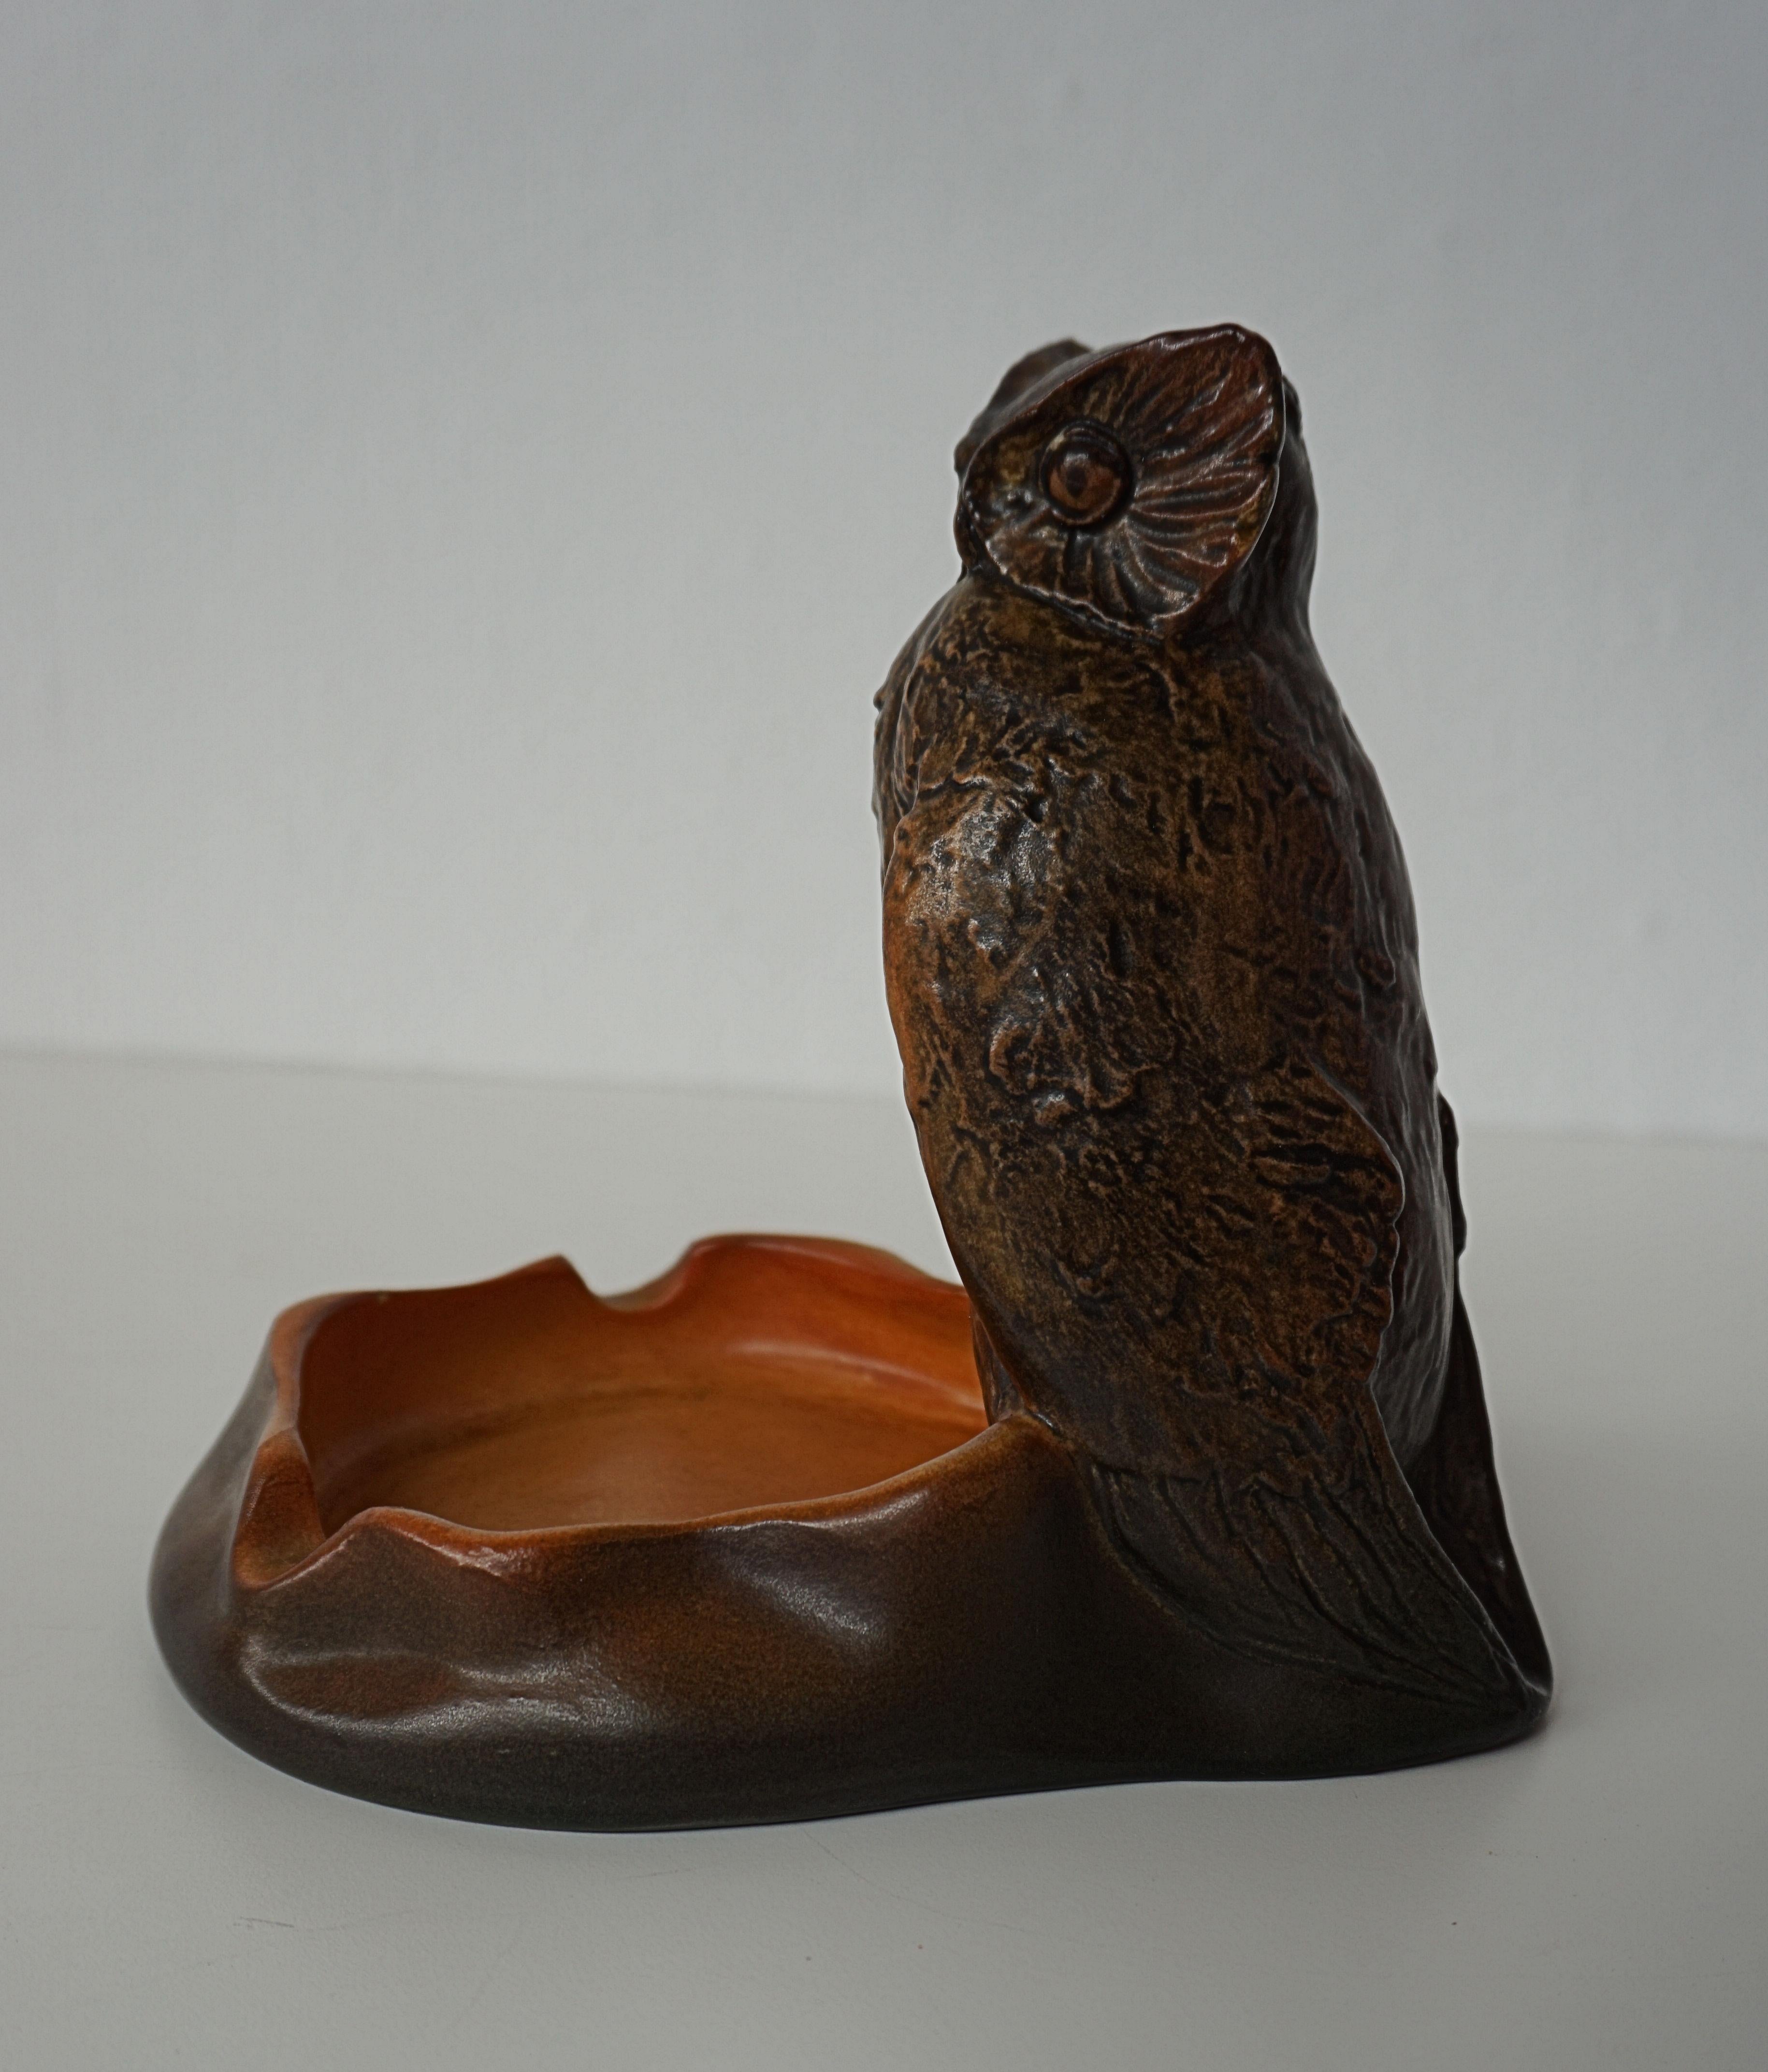 Danish handmade Art Nouveau ash tray / bowl designed by Niels Norvill in 1915 for P. Ipsens Enke.

The art nuveau ash tray / bowl feature a small attentative owl watching out into the room.

Ipsens Enke (1843 - 1955) was a very succesfull